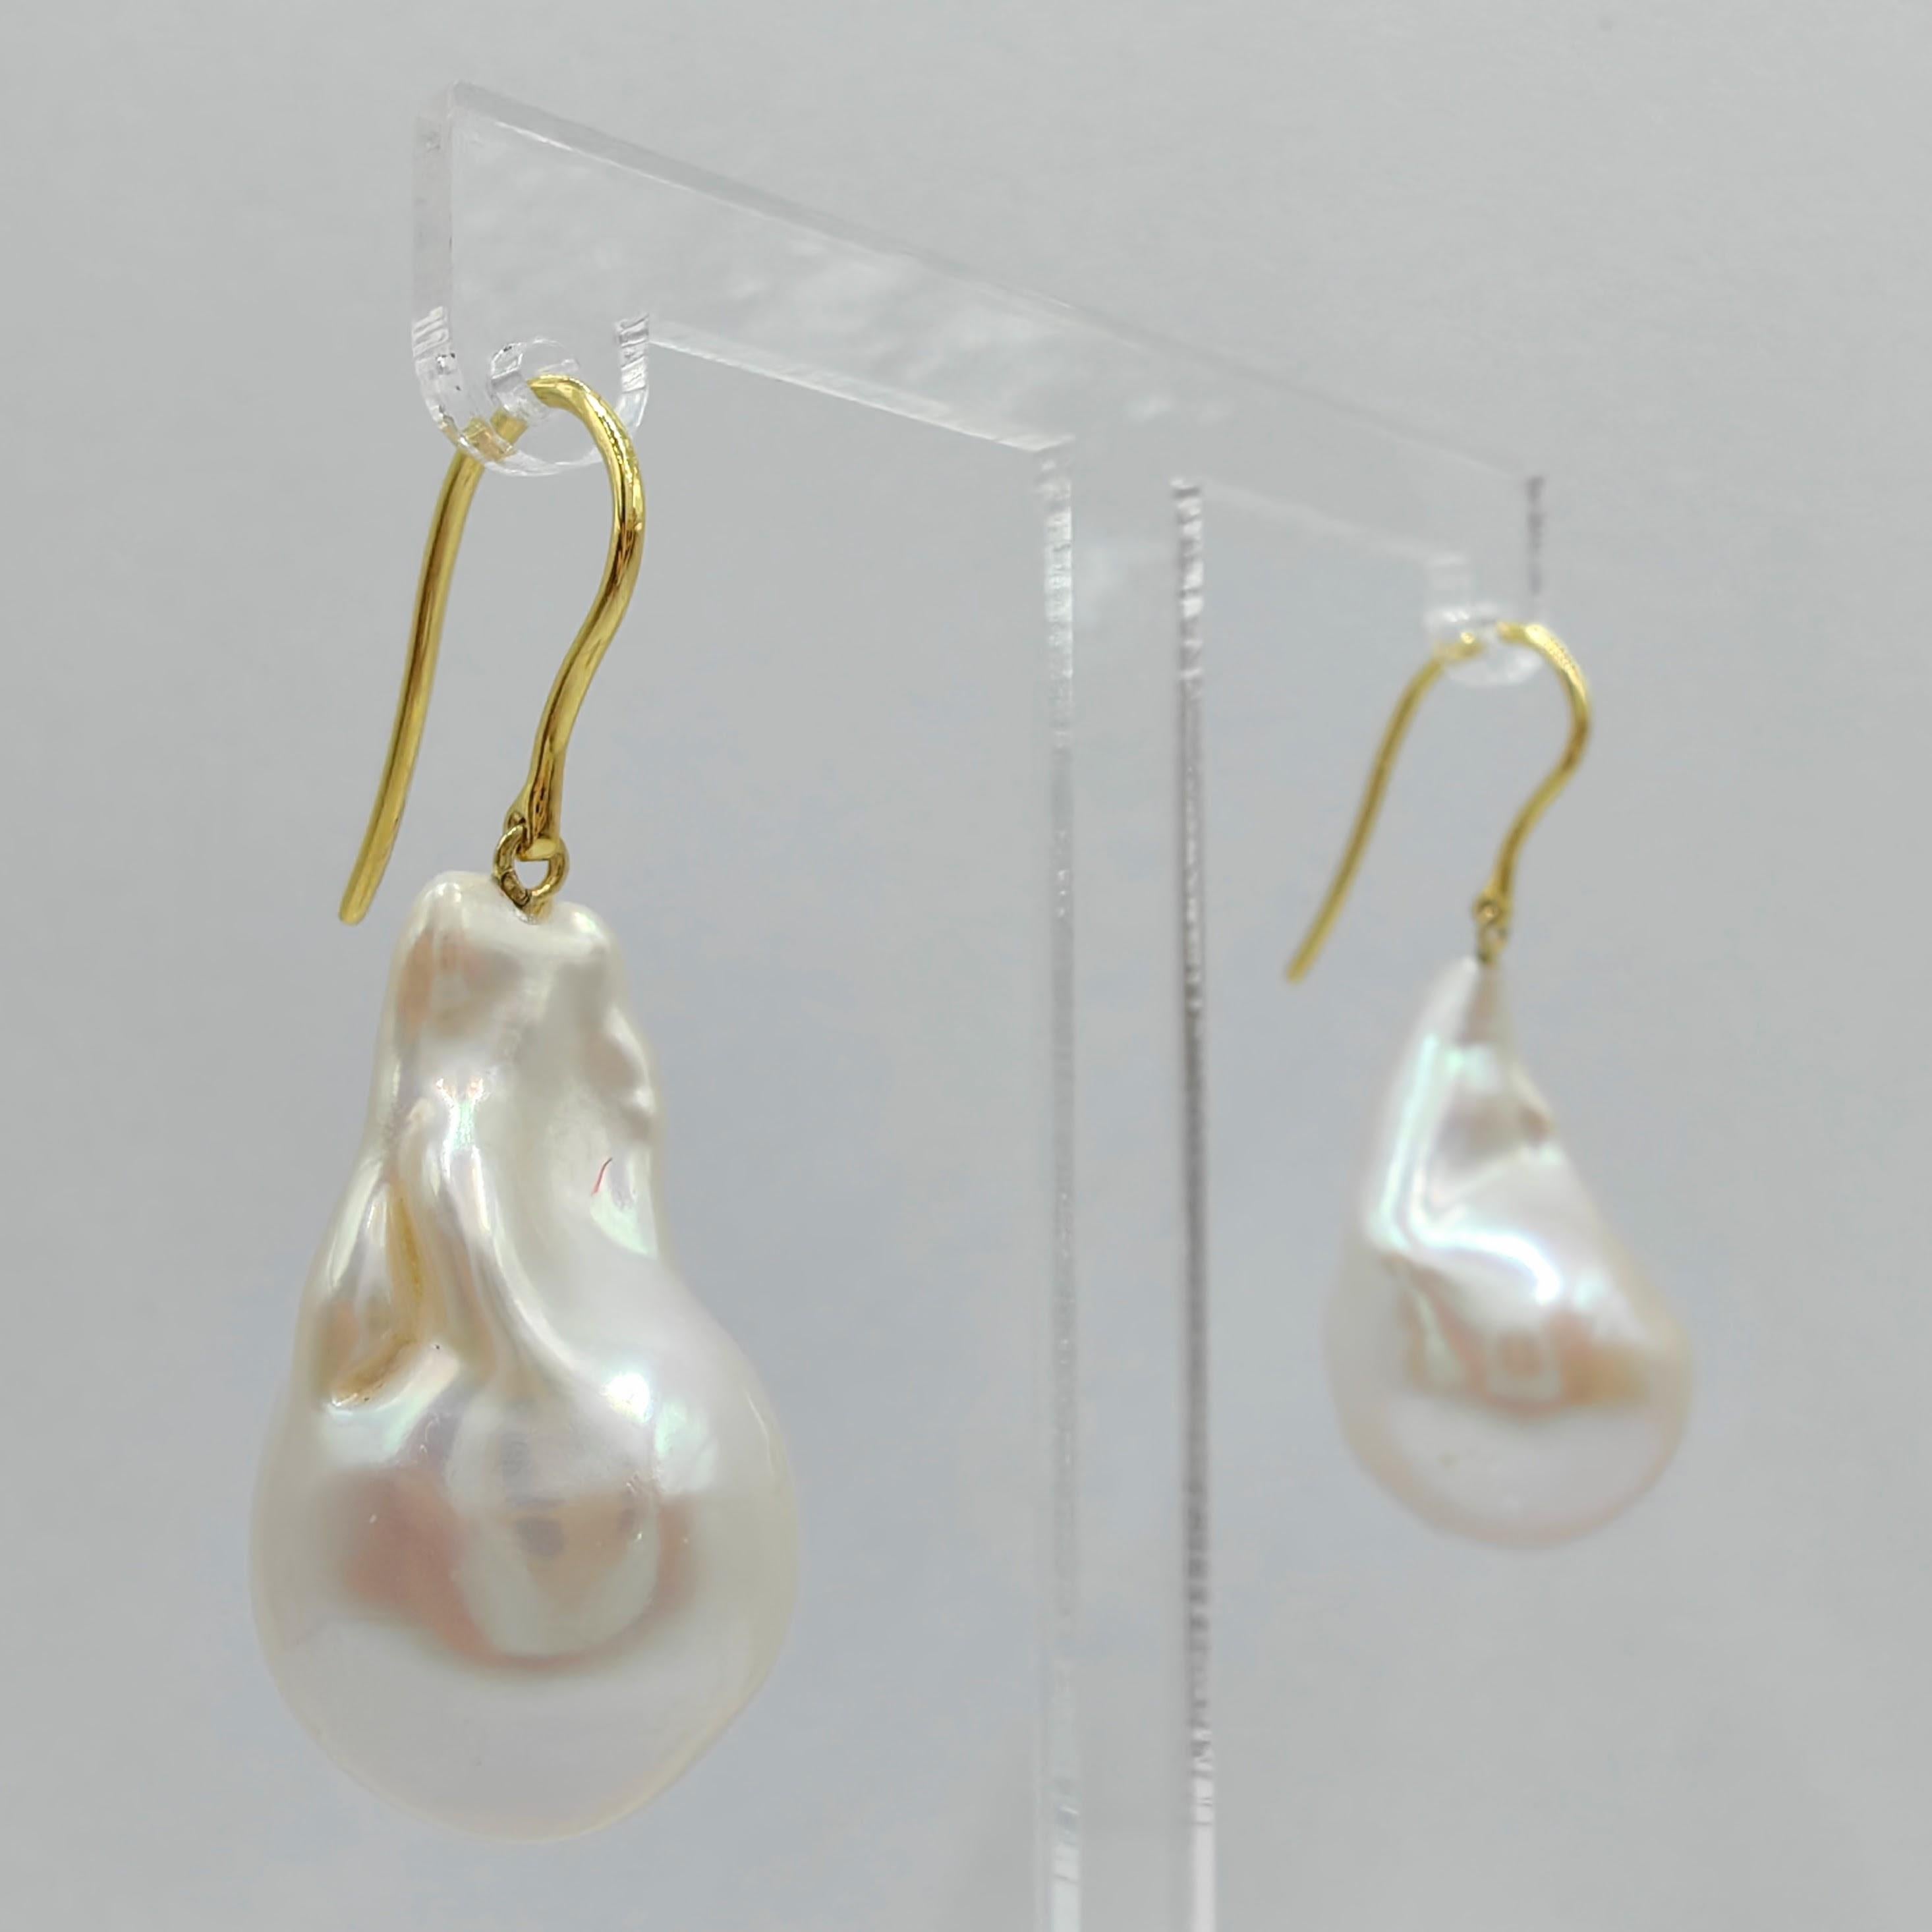 Uncut Iridescent Baroque Pearl Drop Earrings With 18K Yellow Gold French Hooks